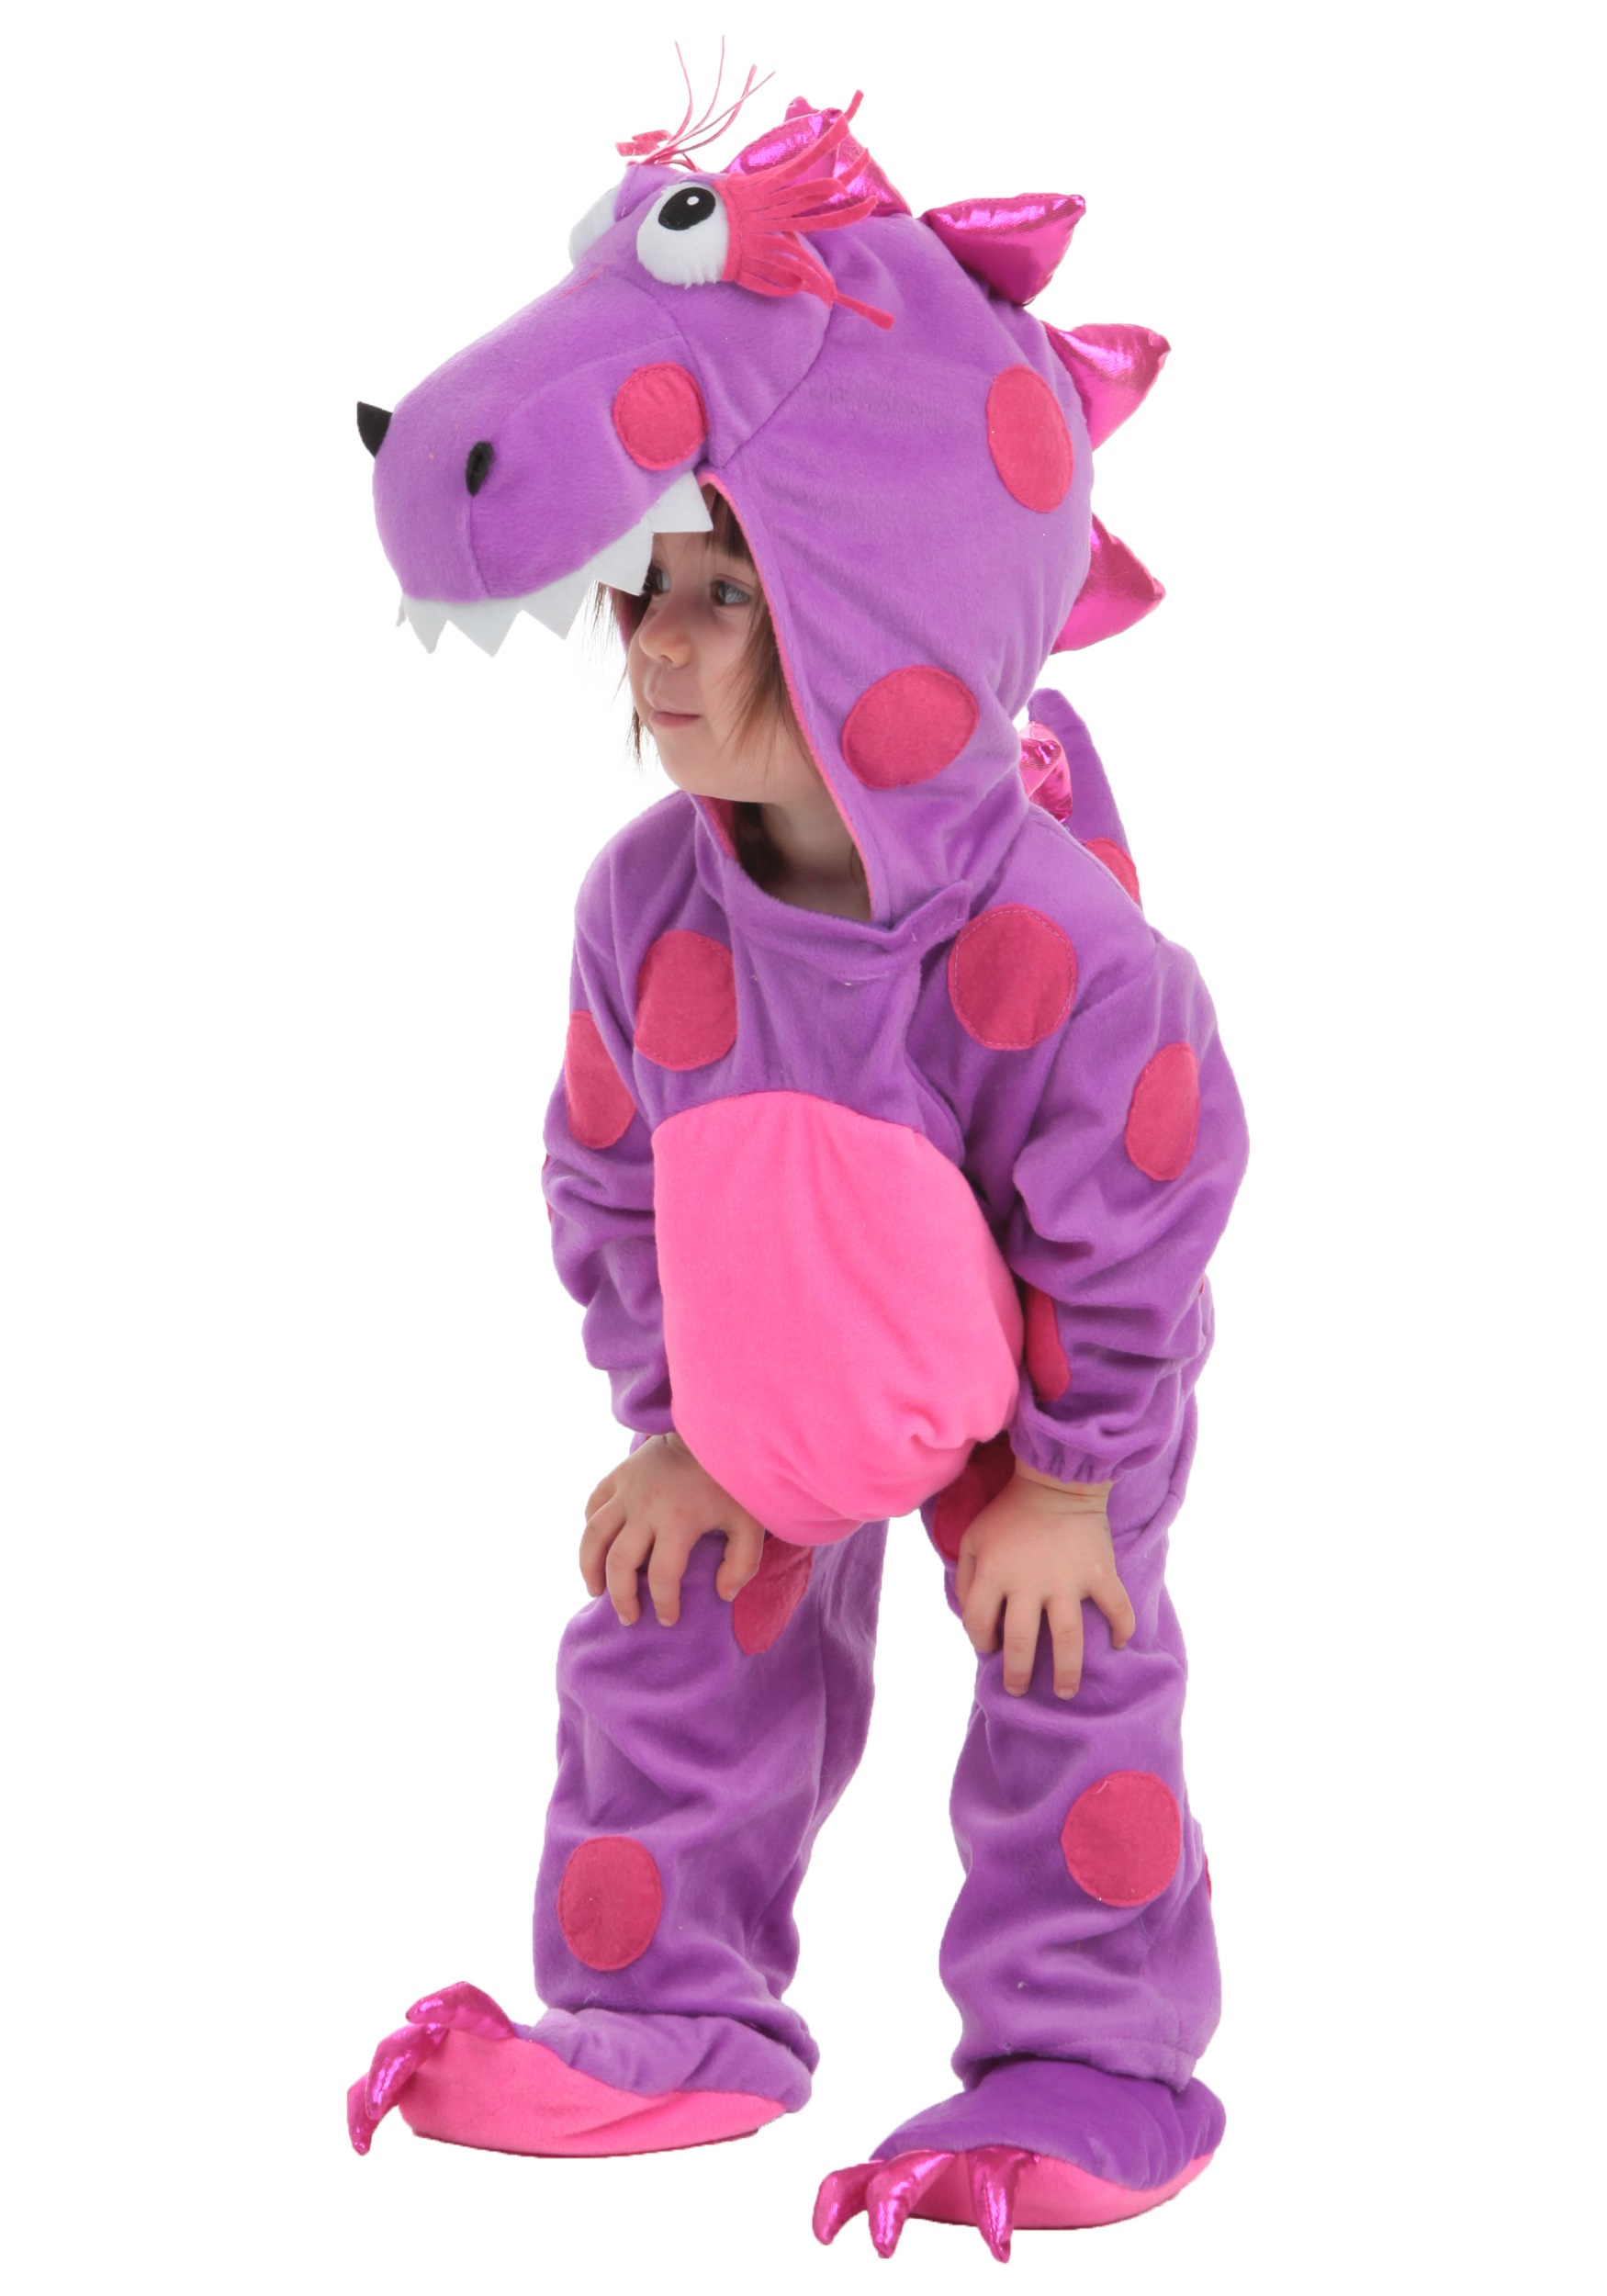 Teagan the Dragon Costume for Toddlers